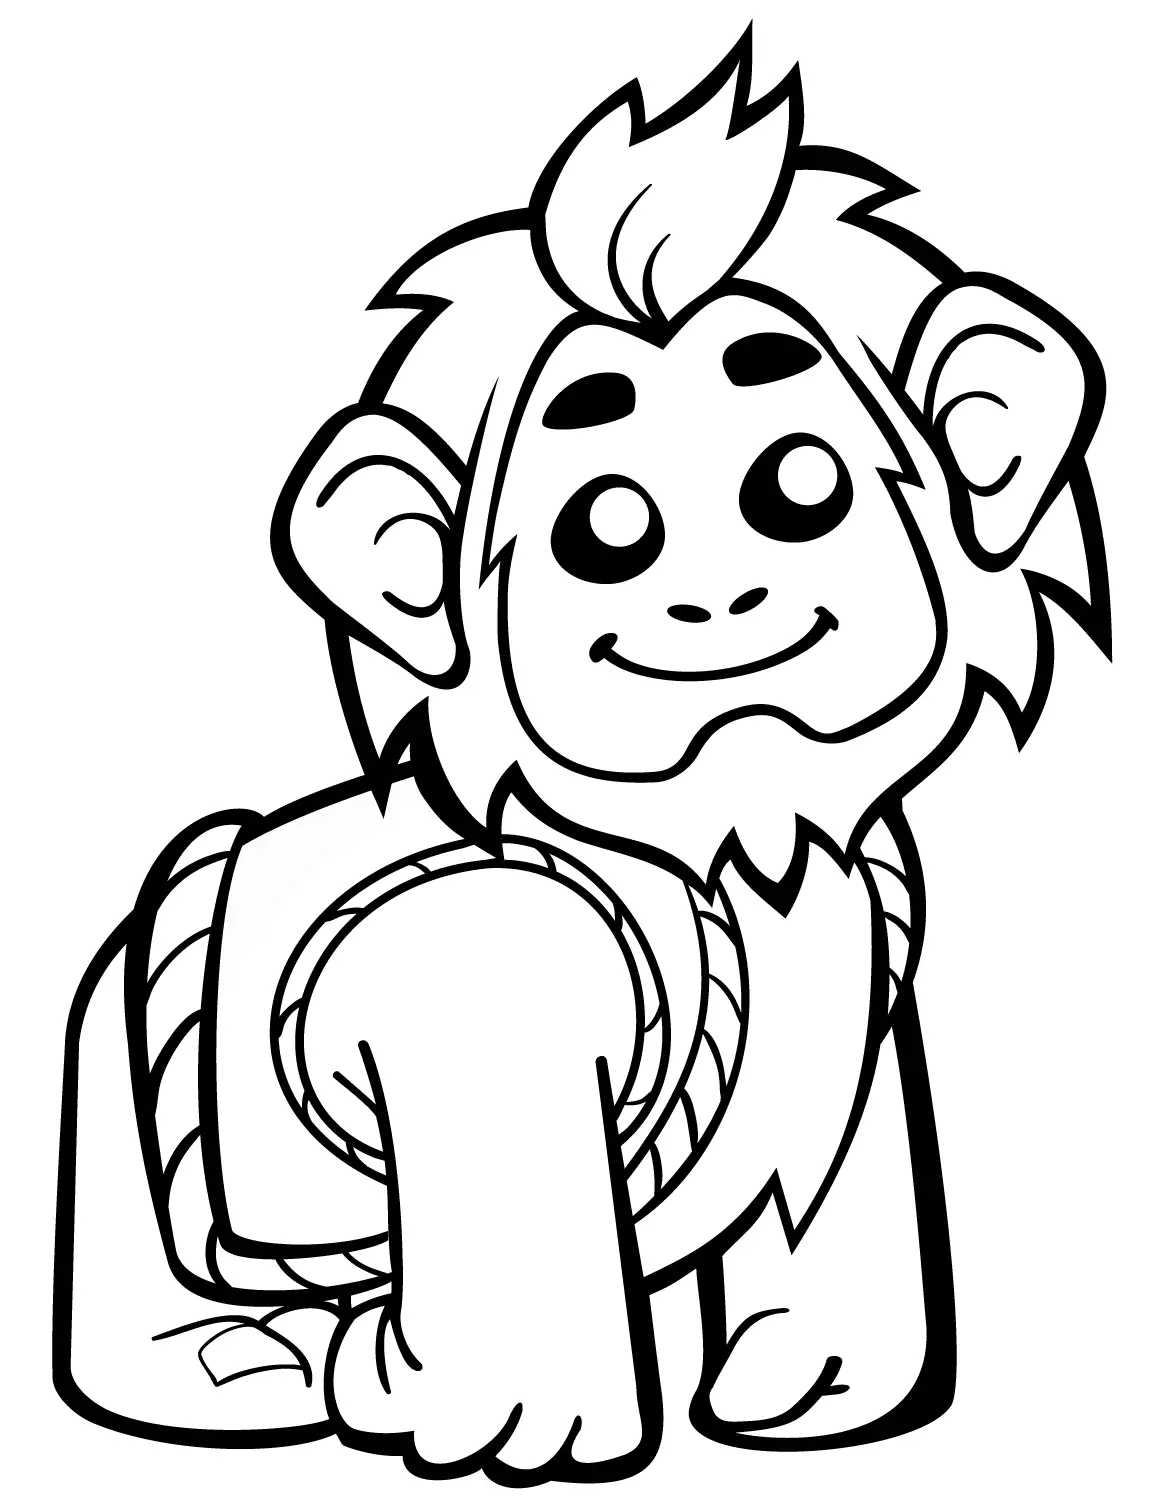 cute-monkey-ape-in-vest-coloring-page-for-small children